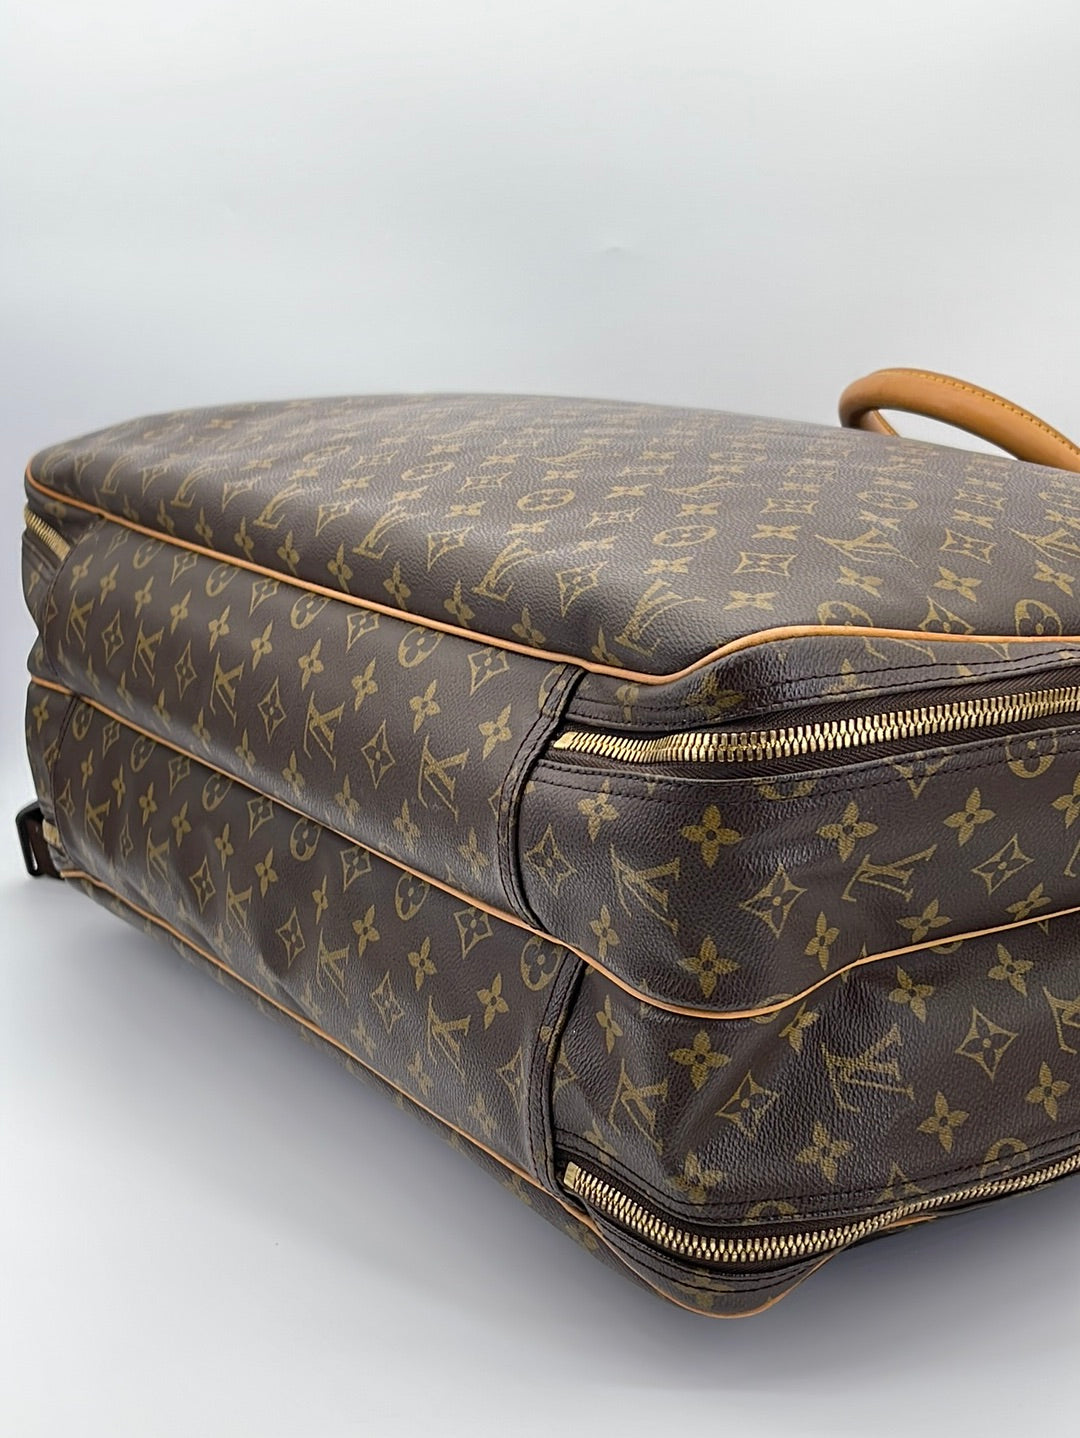 Authentic Second Hand Louis Vuitton Alize 24 Heures, 60% OFF